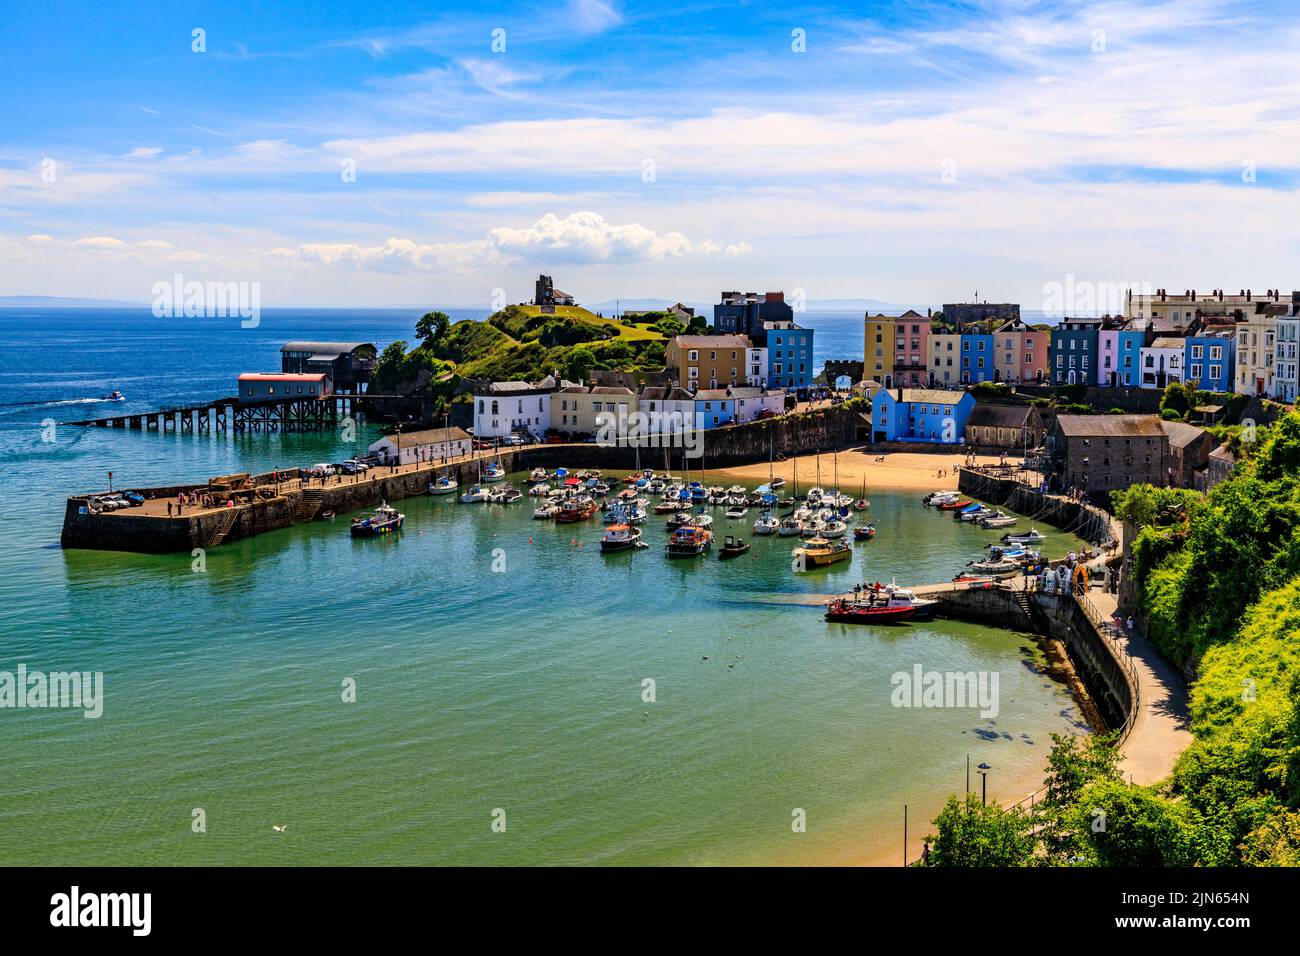 The picturesque sheltered harbour is overlooked by rows of colourful houses in Tenby, Pembrokeshire, Wales, UK Stock Photo